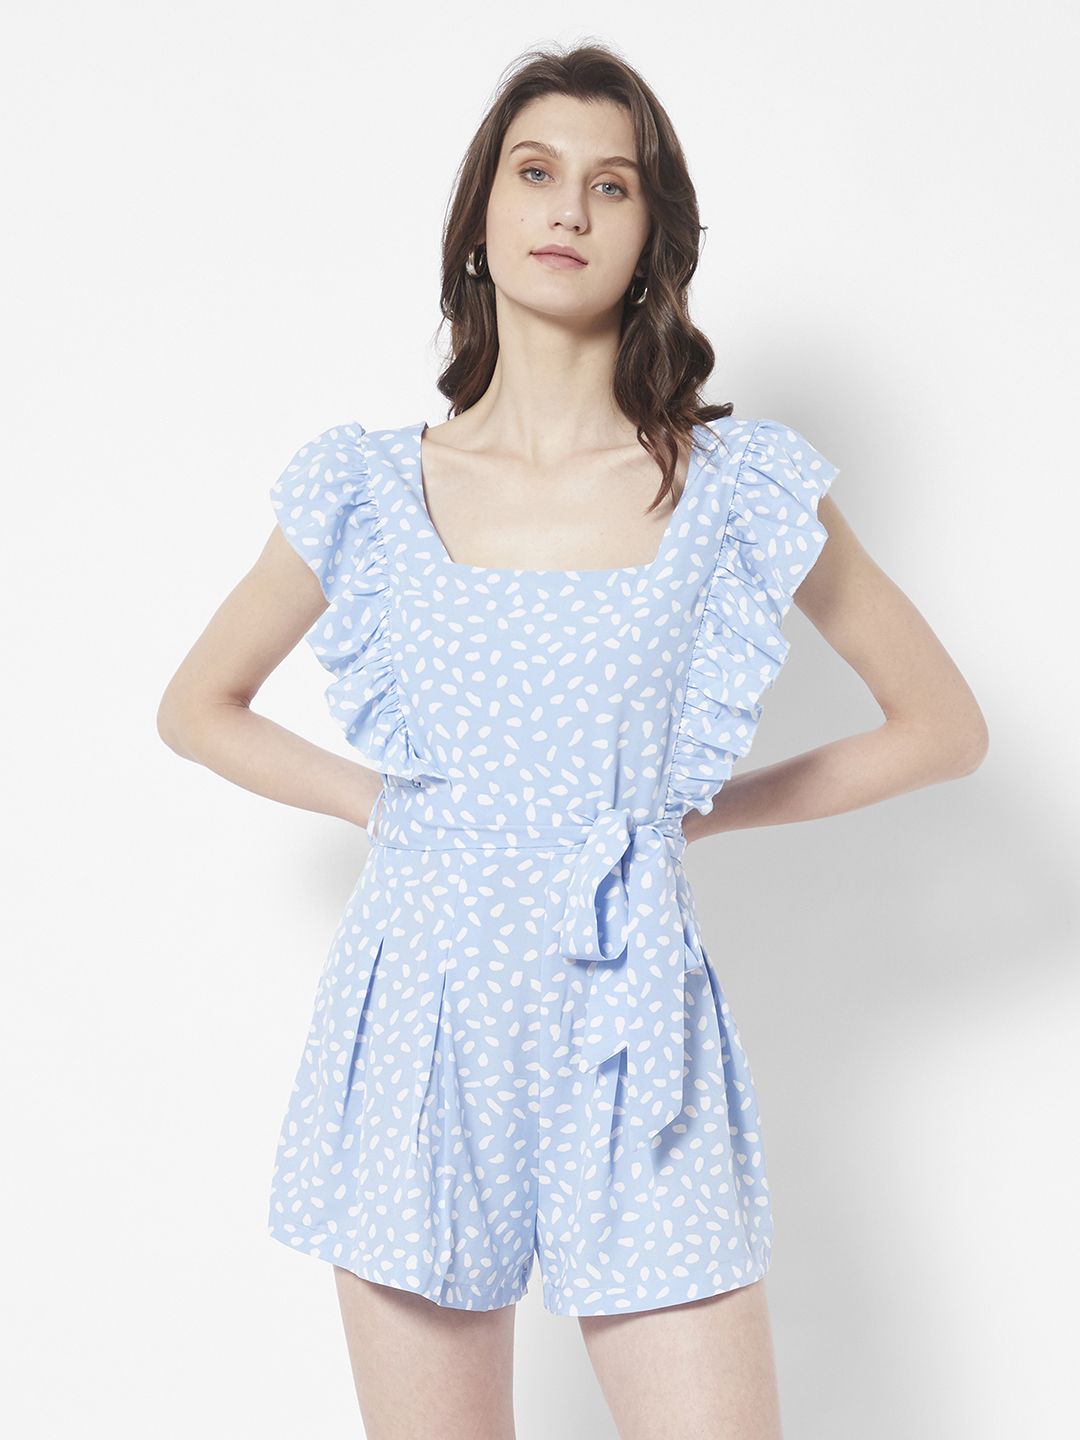 URBANIC Blue & White Abstract Printed with Ruffles Playsuit Comes with a Belt Price in India